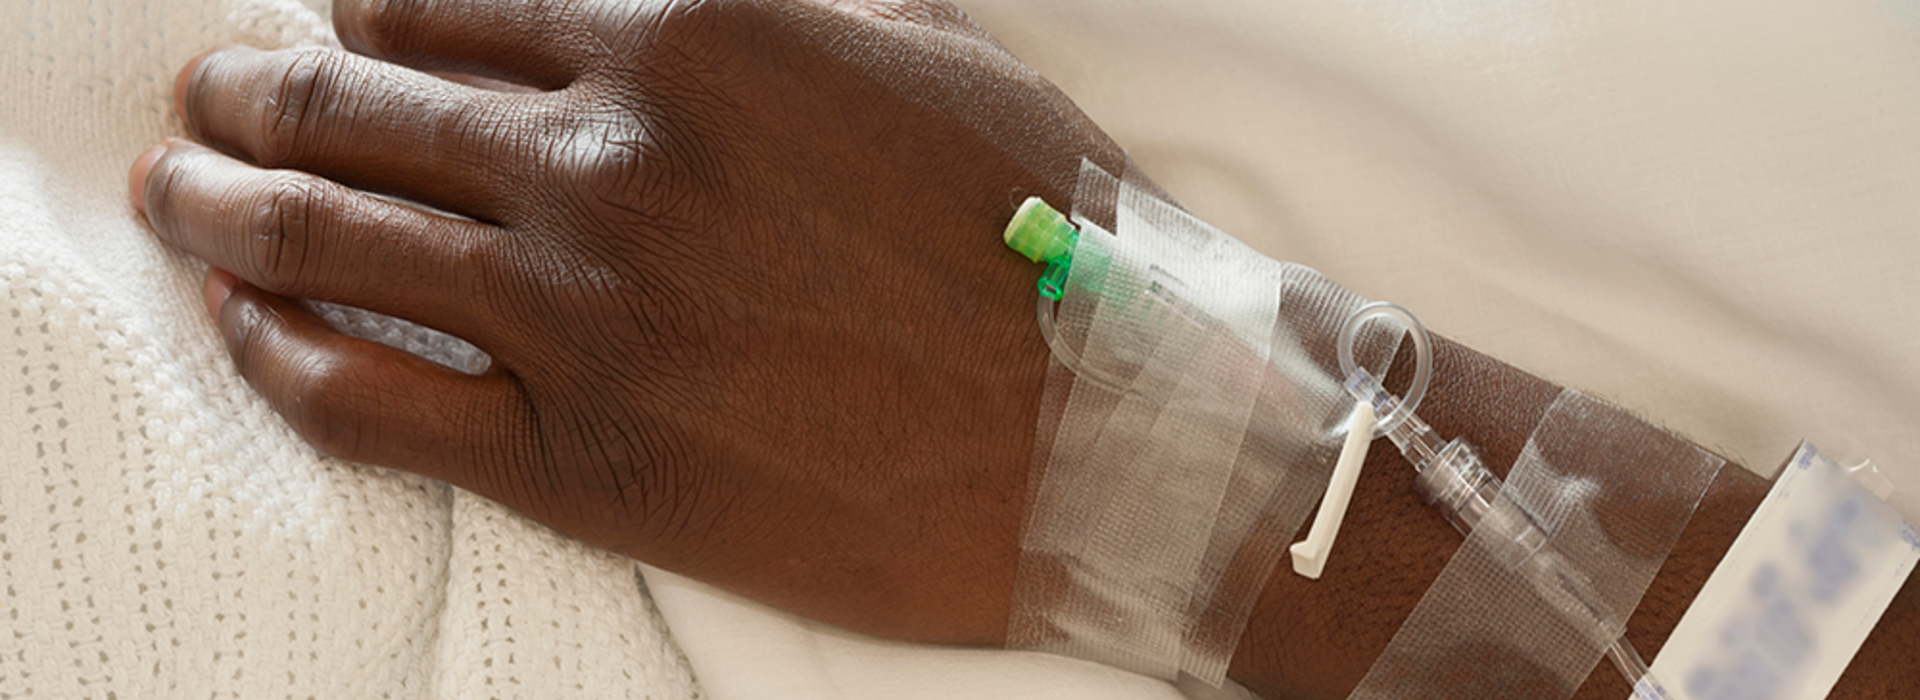 A close-up of a Black patient's hand with tape, hospital bands, and IVs.